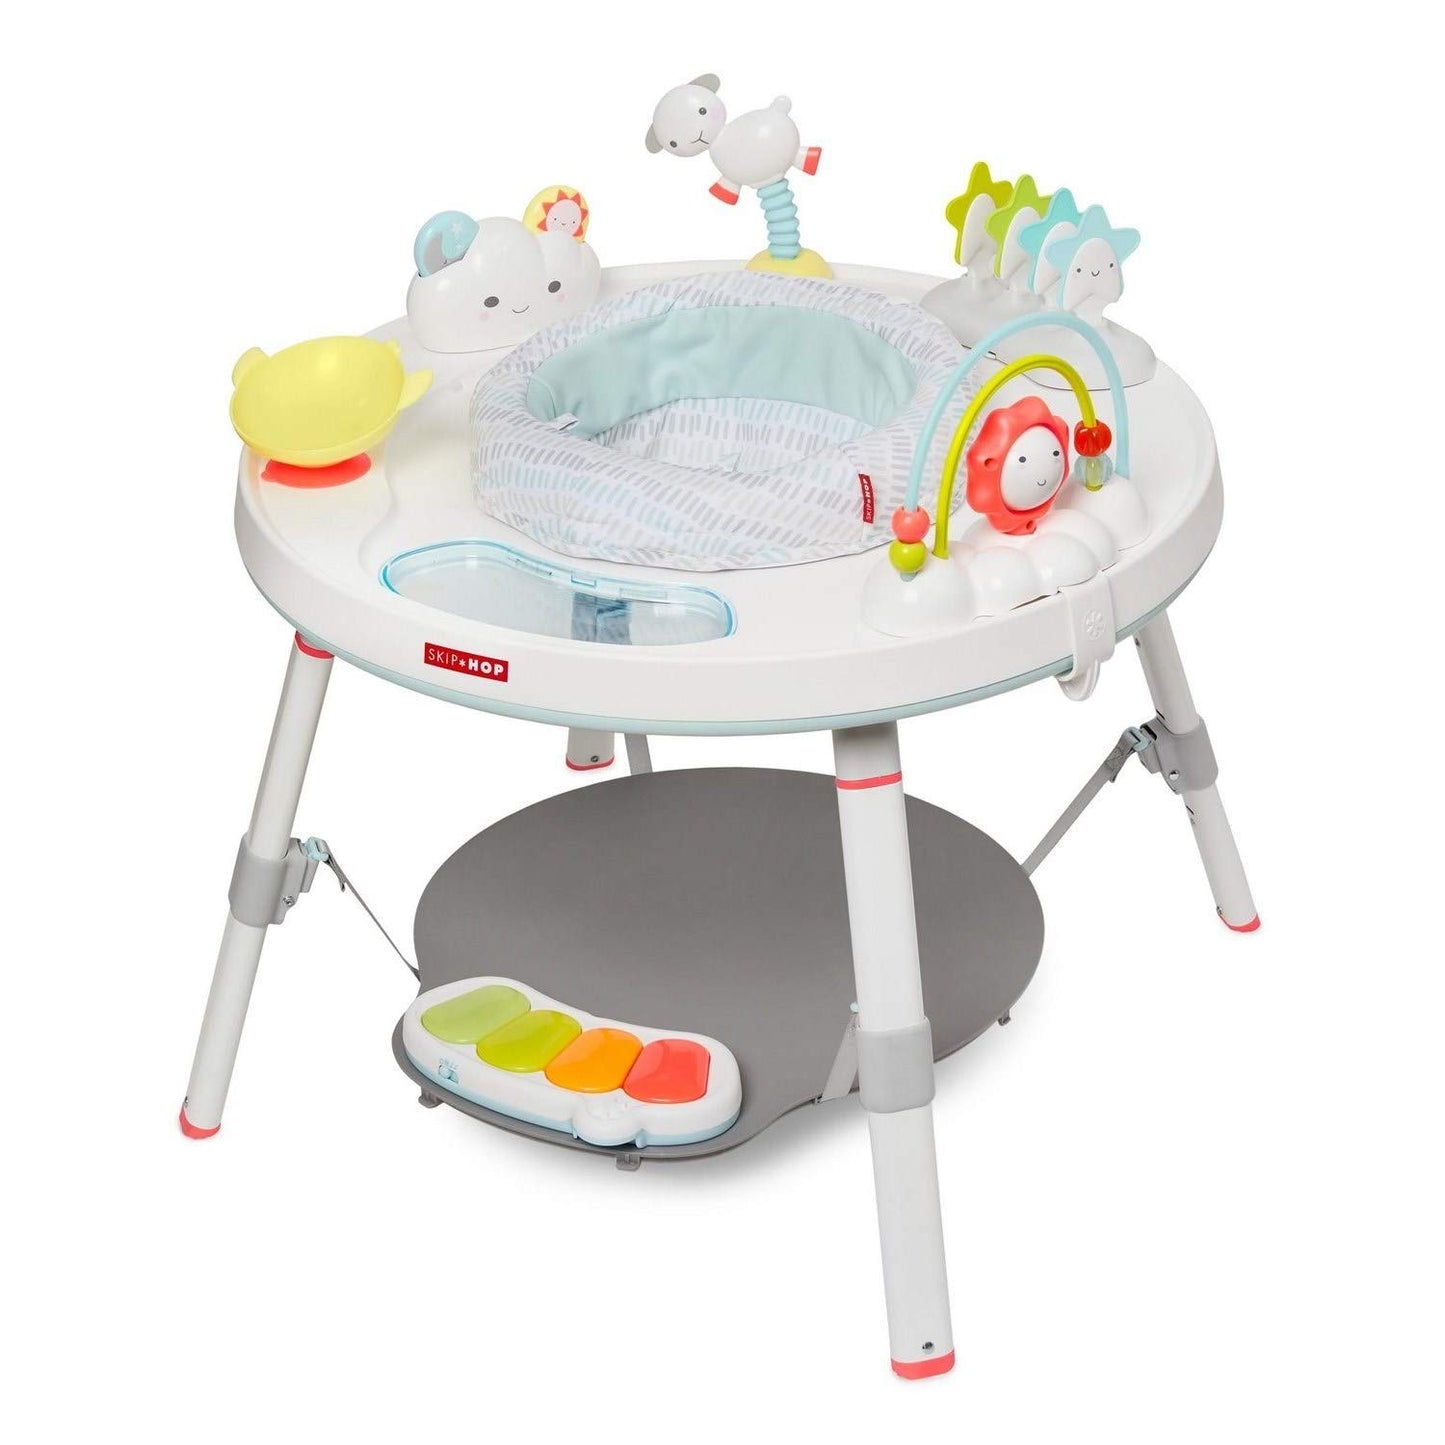 Skip Hop Baby Activity Center: Interactive Play Center with 3-Stage Grow-with-Me Functionality, 4mo+, Explore & More